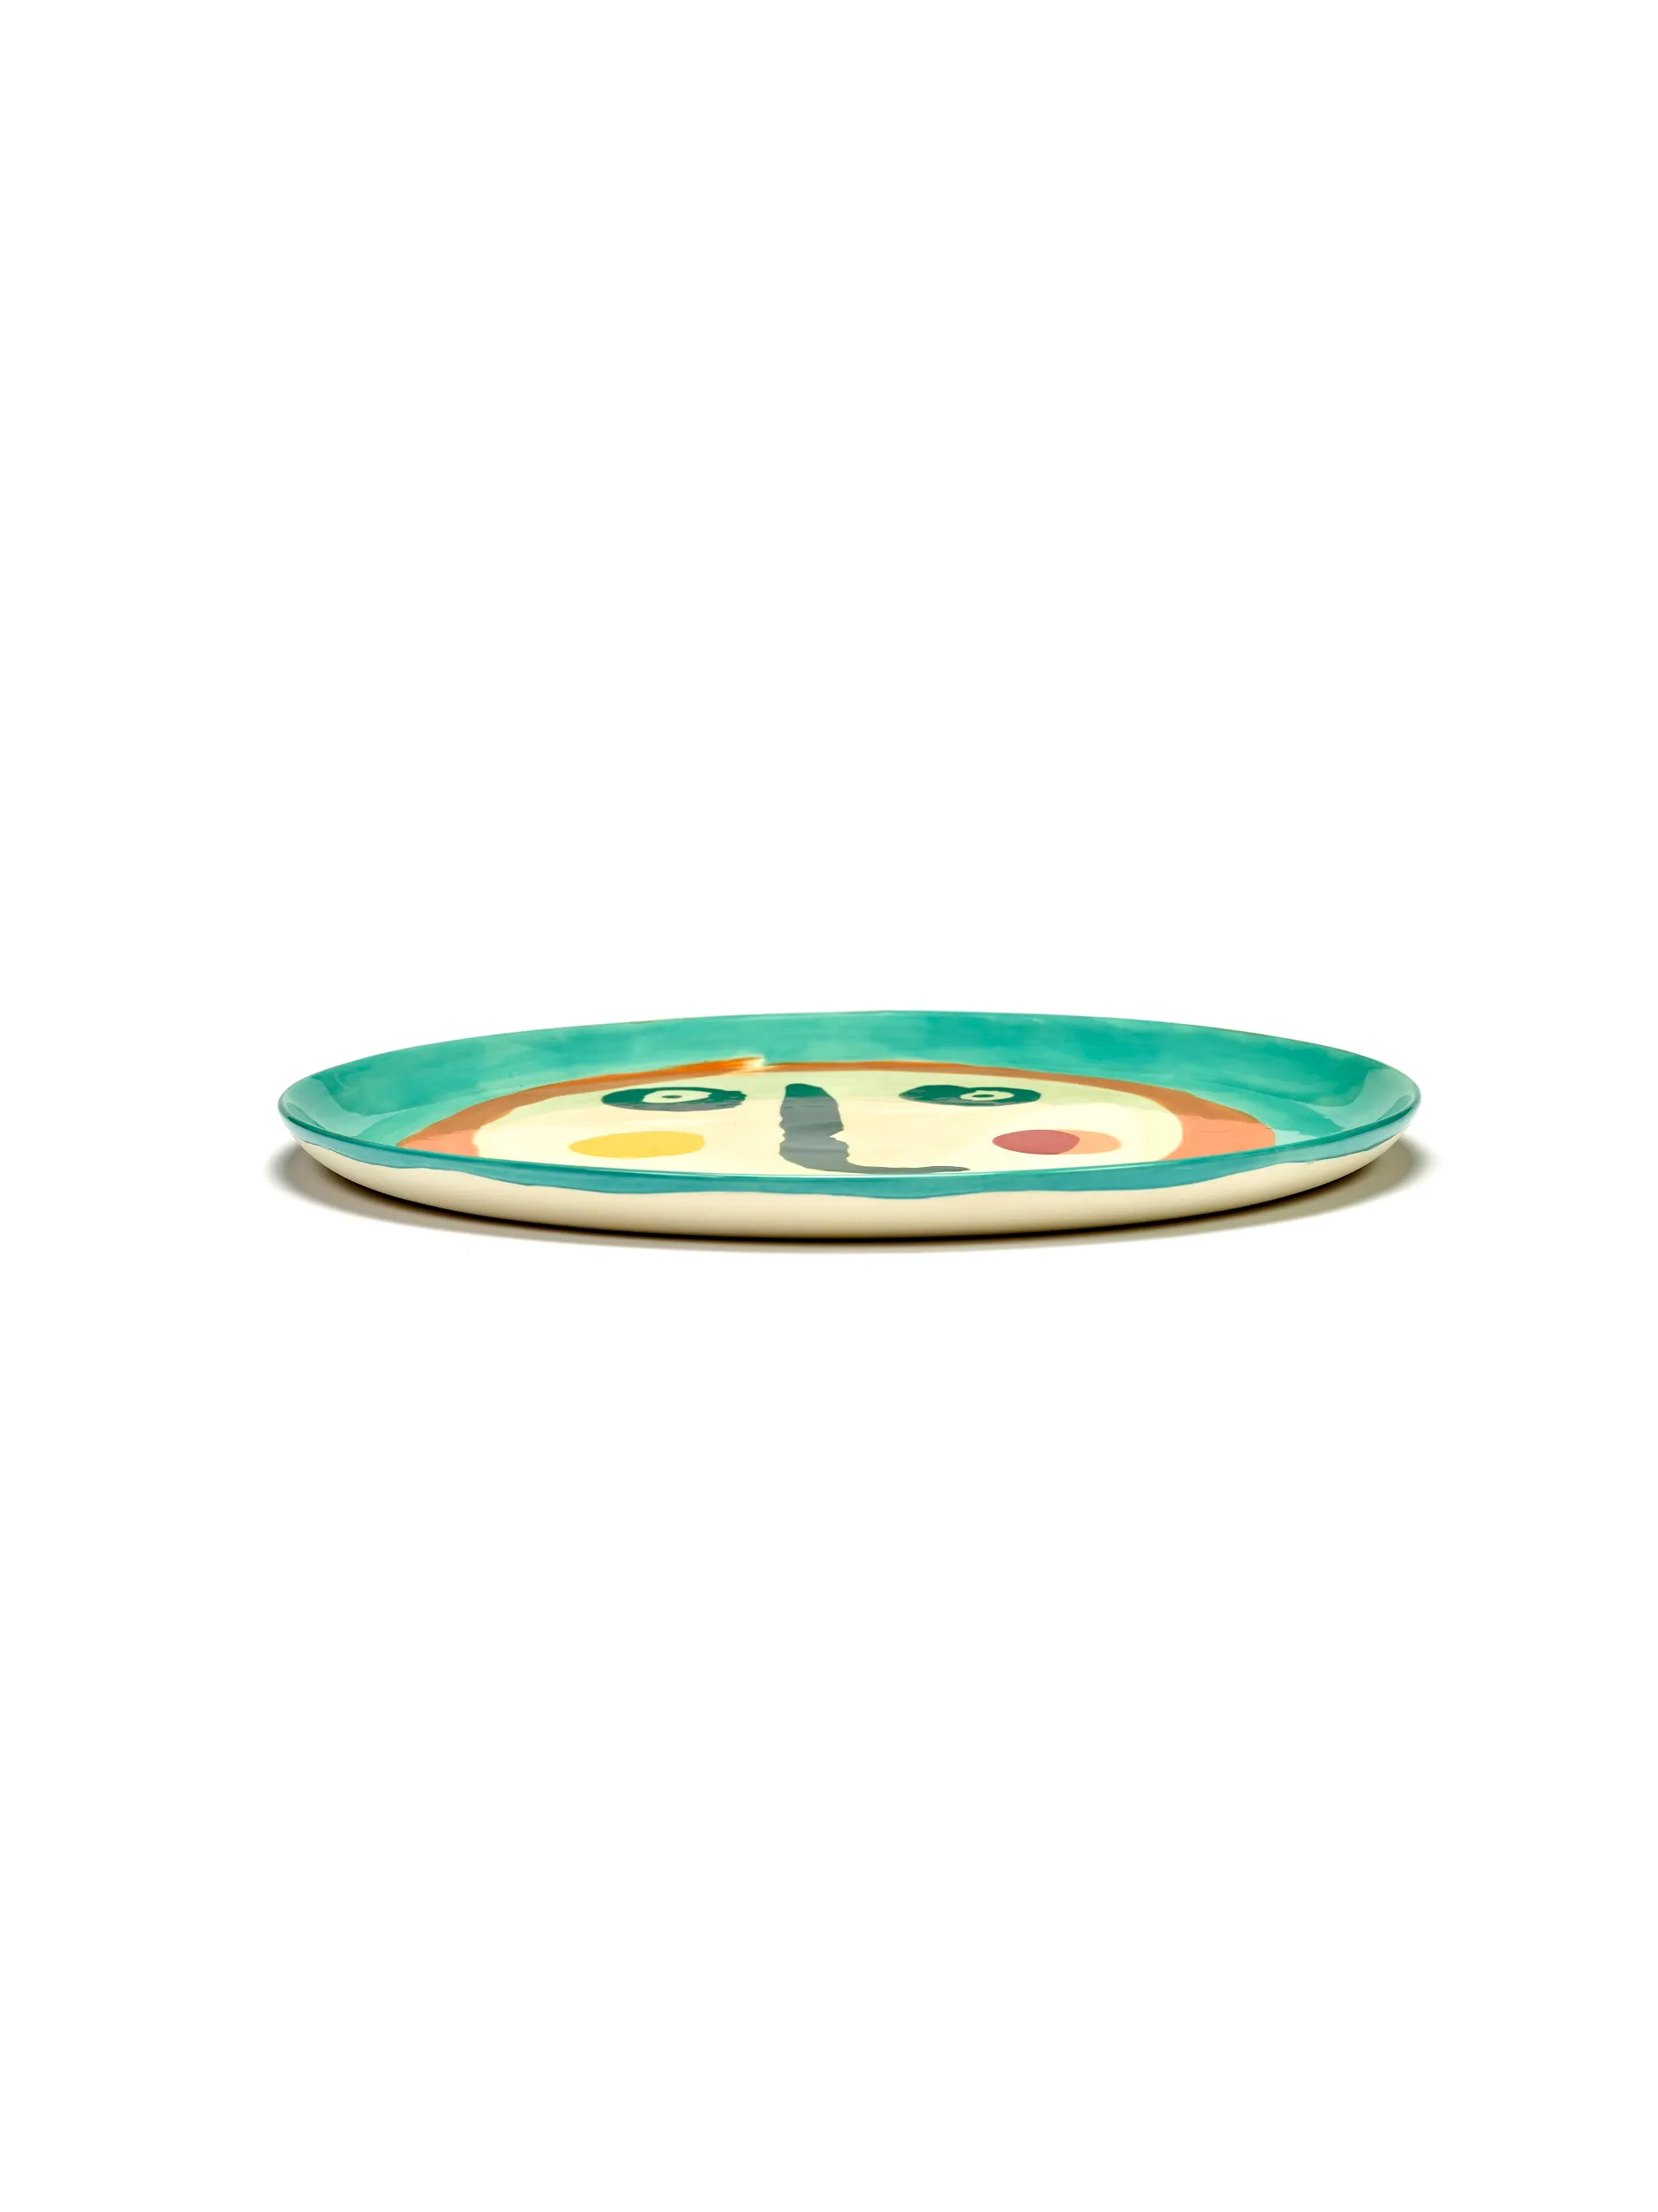 Serving Plate Face 2 Feast Ottolenghi by Serax L 35 W 35 H 2 CM